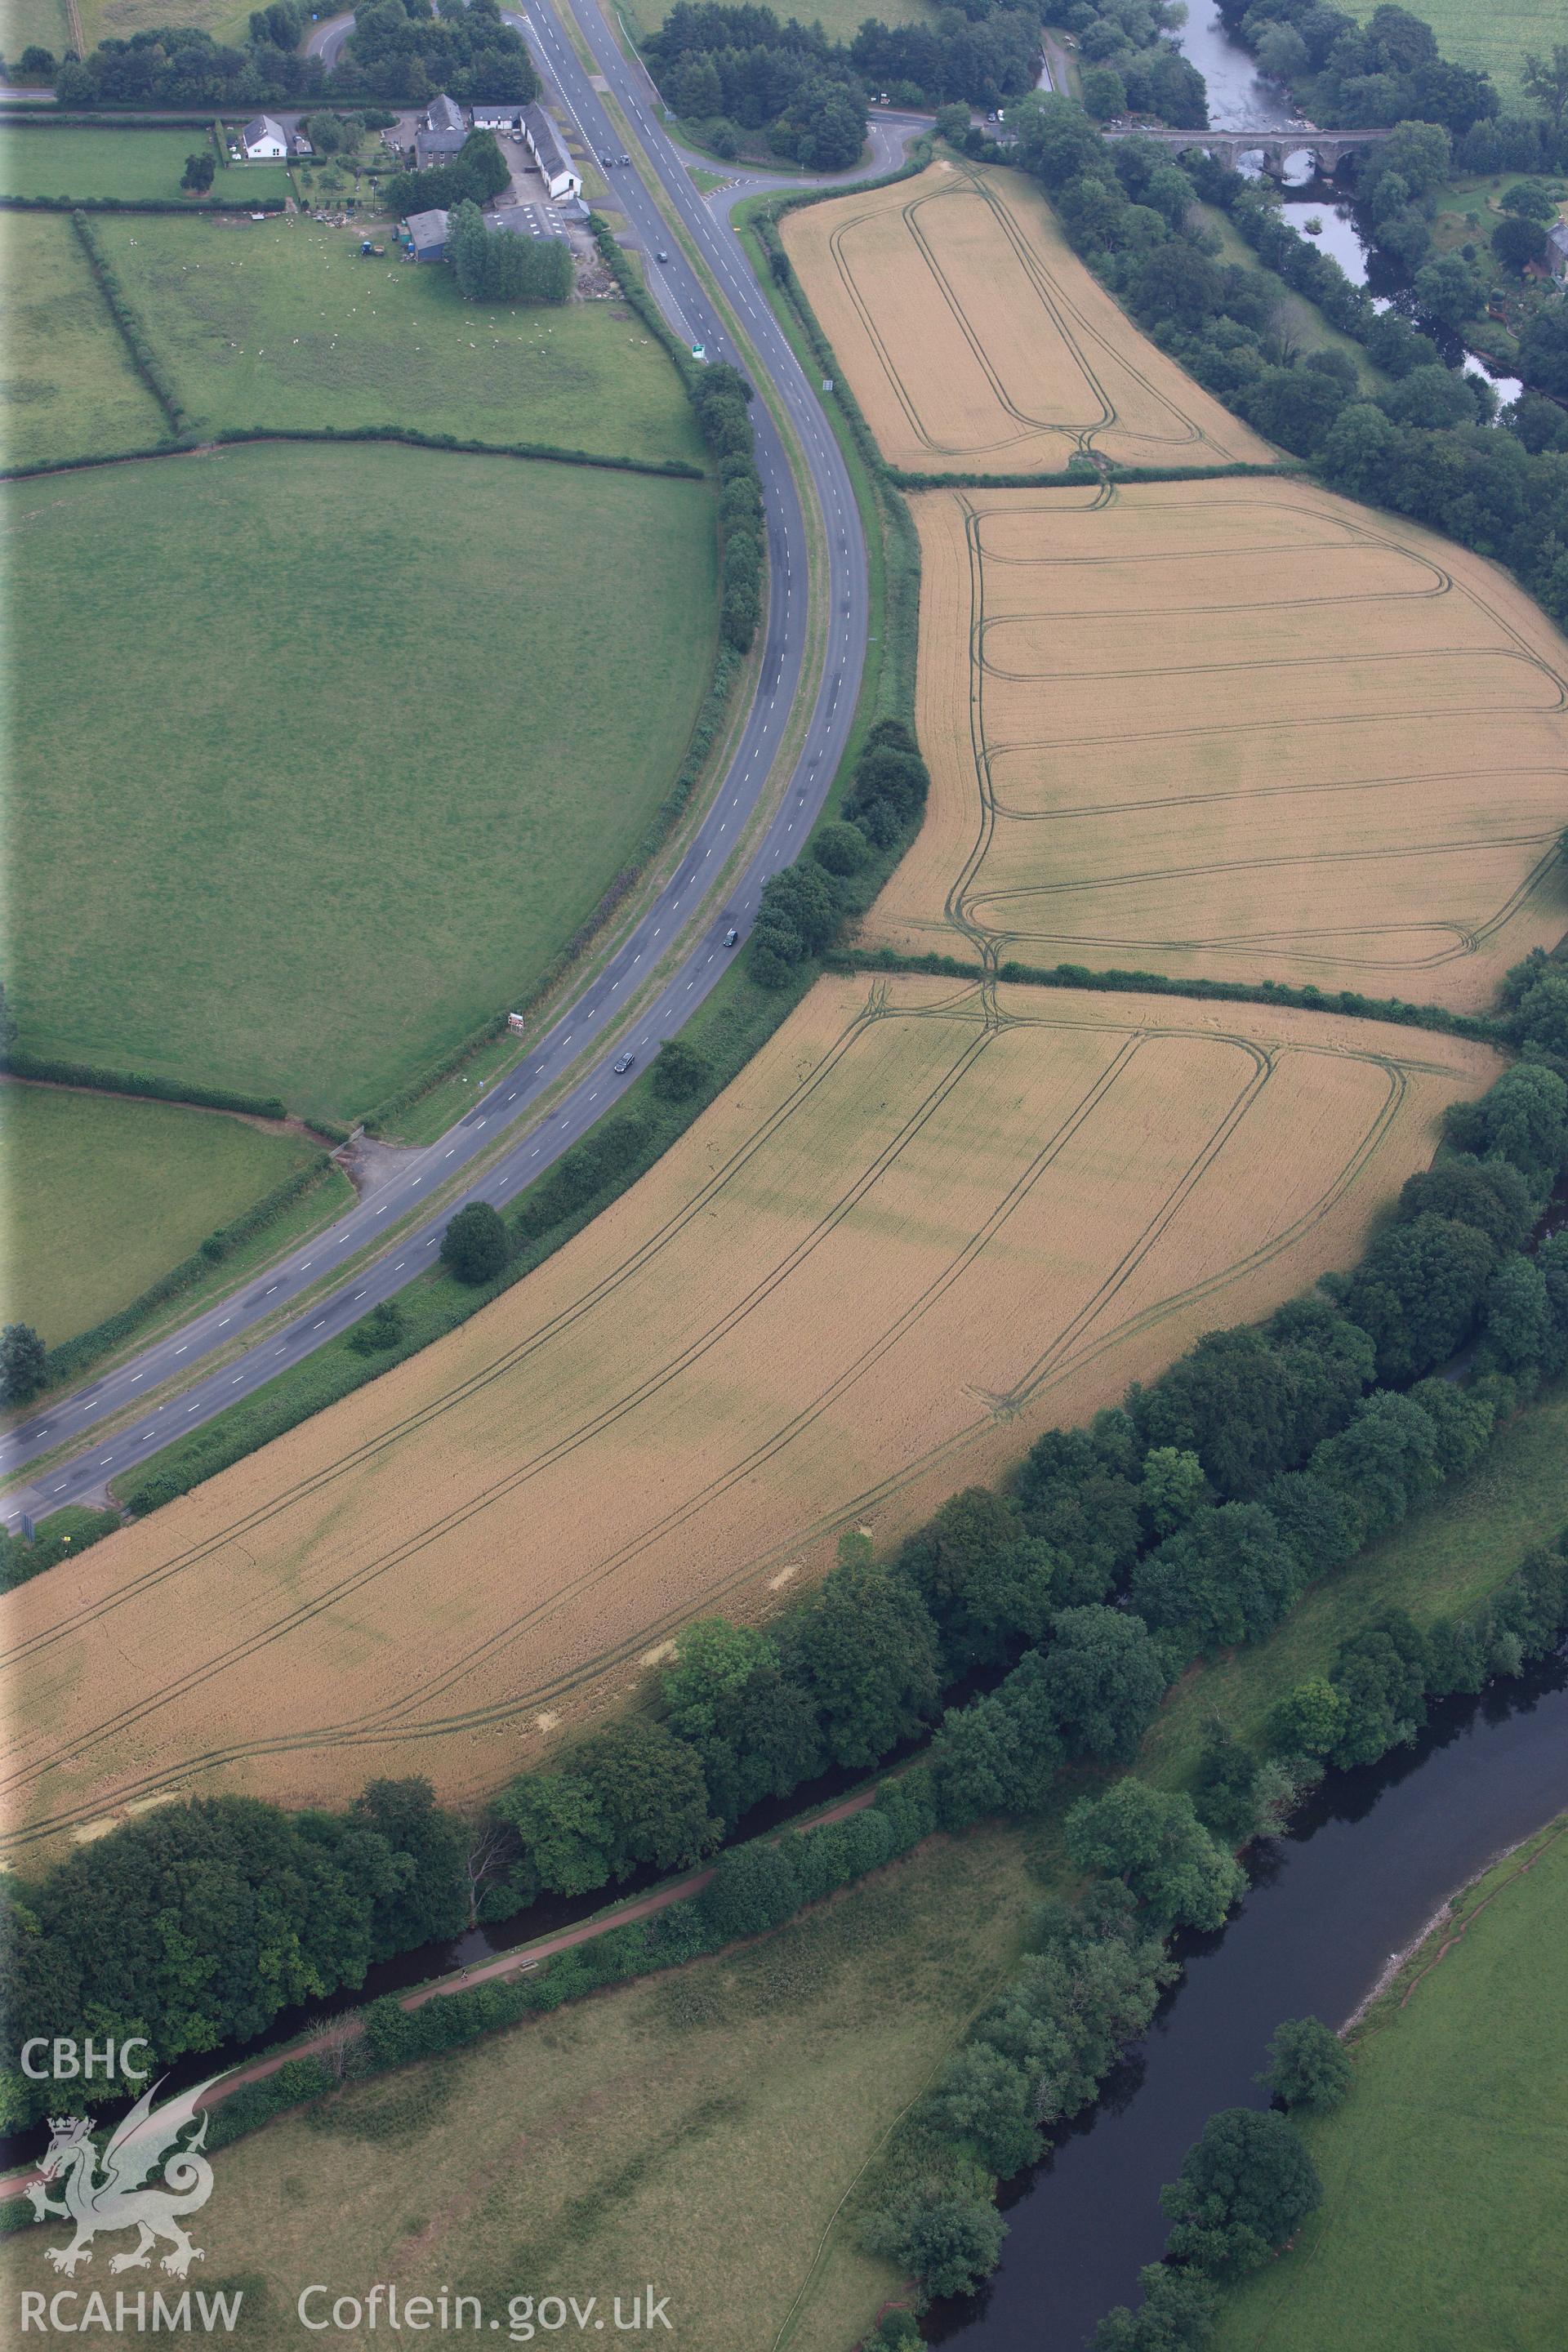 Cefn-brynich Roman fort, detailed view of cropmarks from west, taken by RCAHMW 1st August 2013.